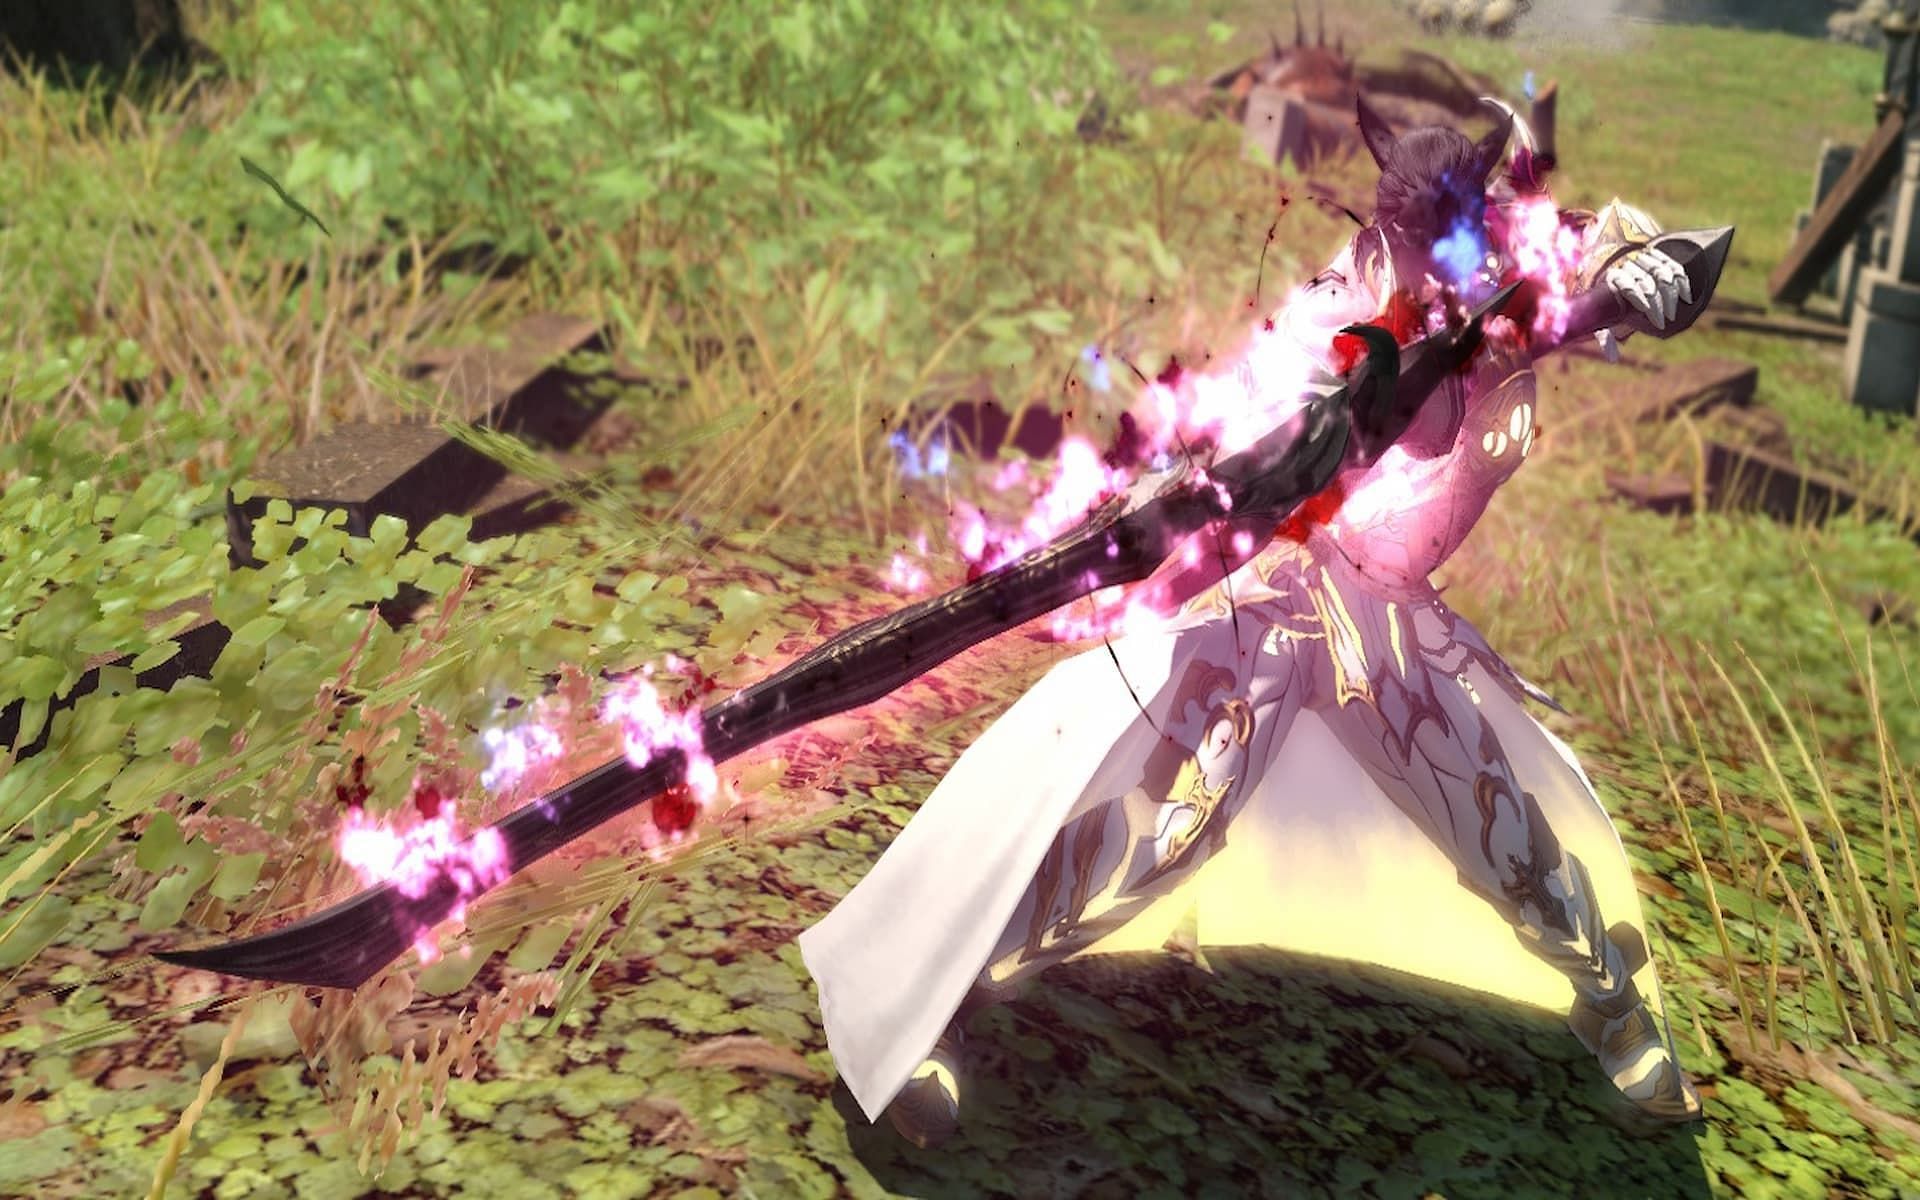 Final Fantasy XIV is filled with dangerous weapons (Image via Square Enix)